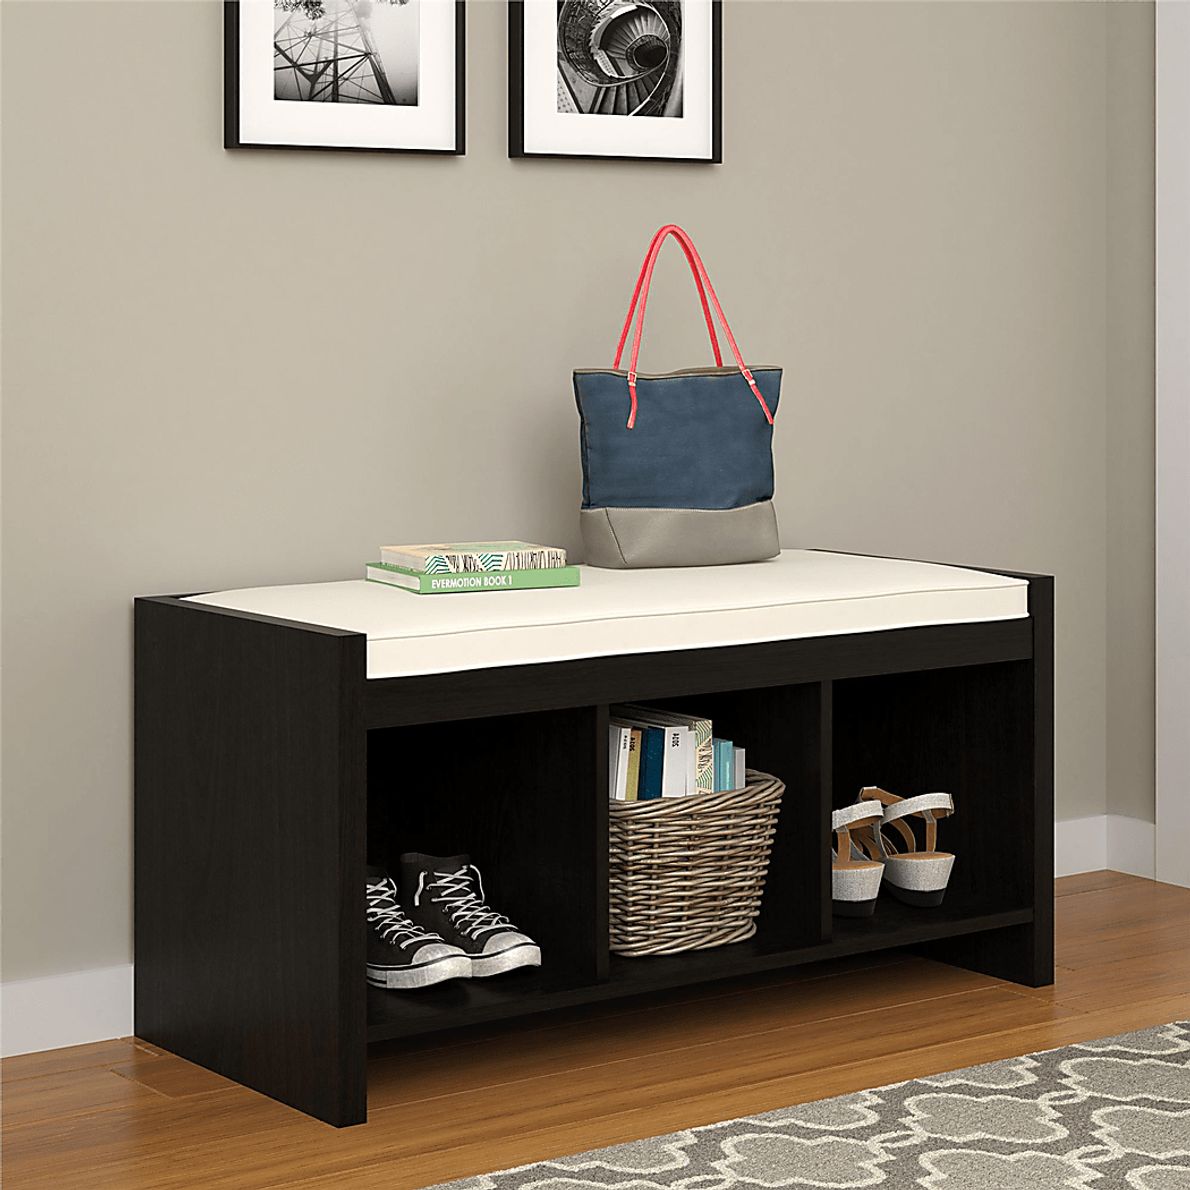 Calice Brown Accent Bench